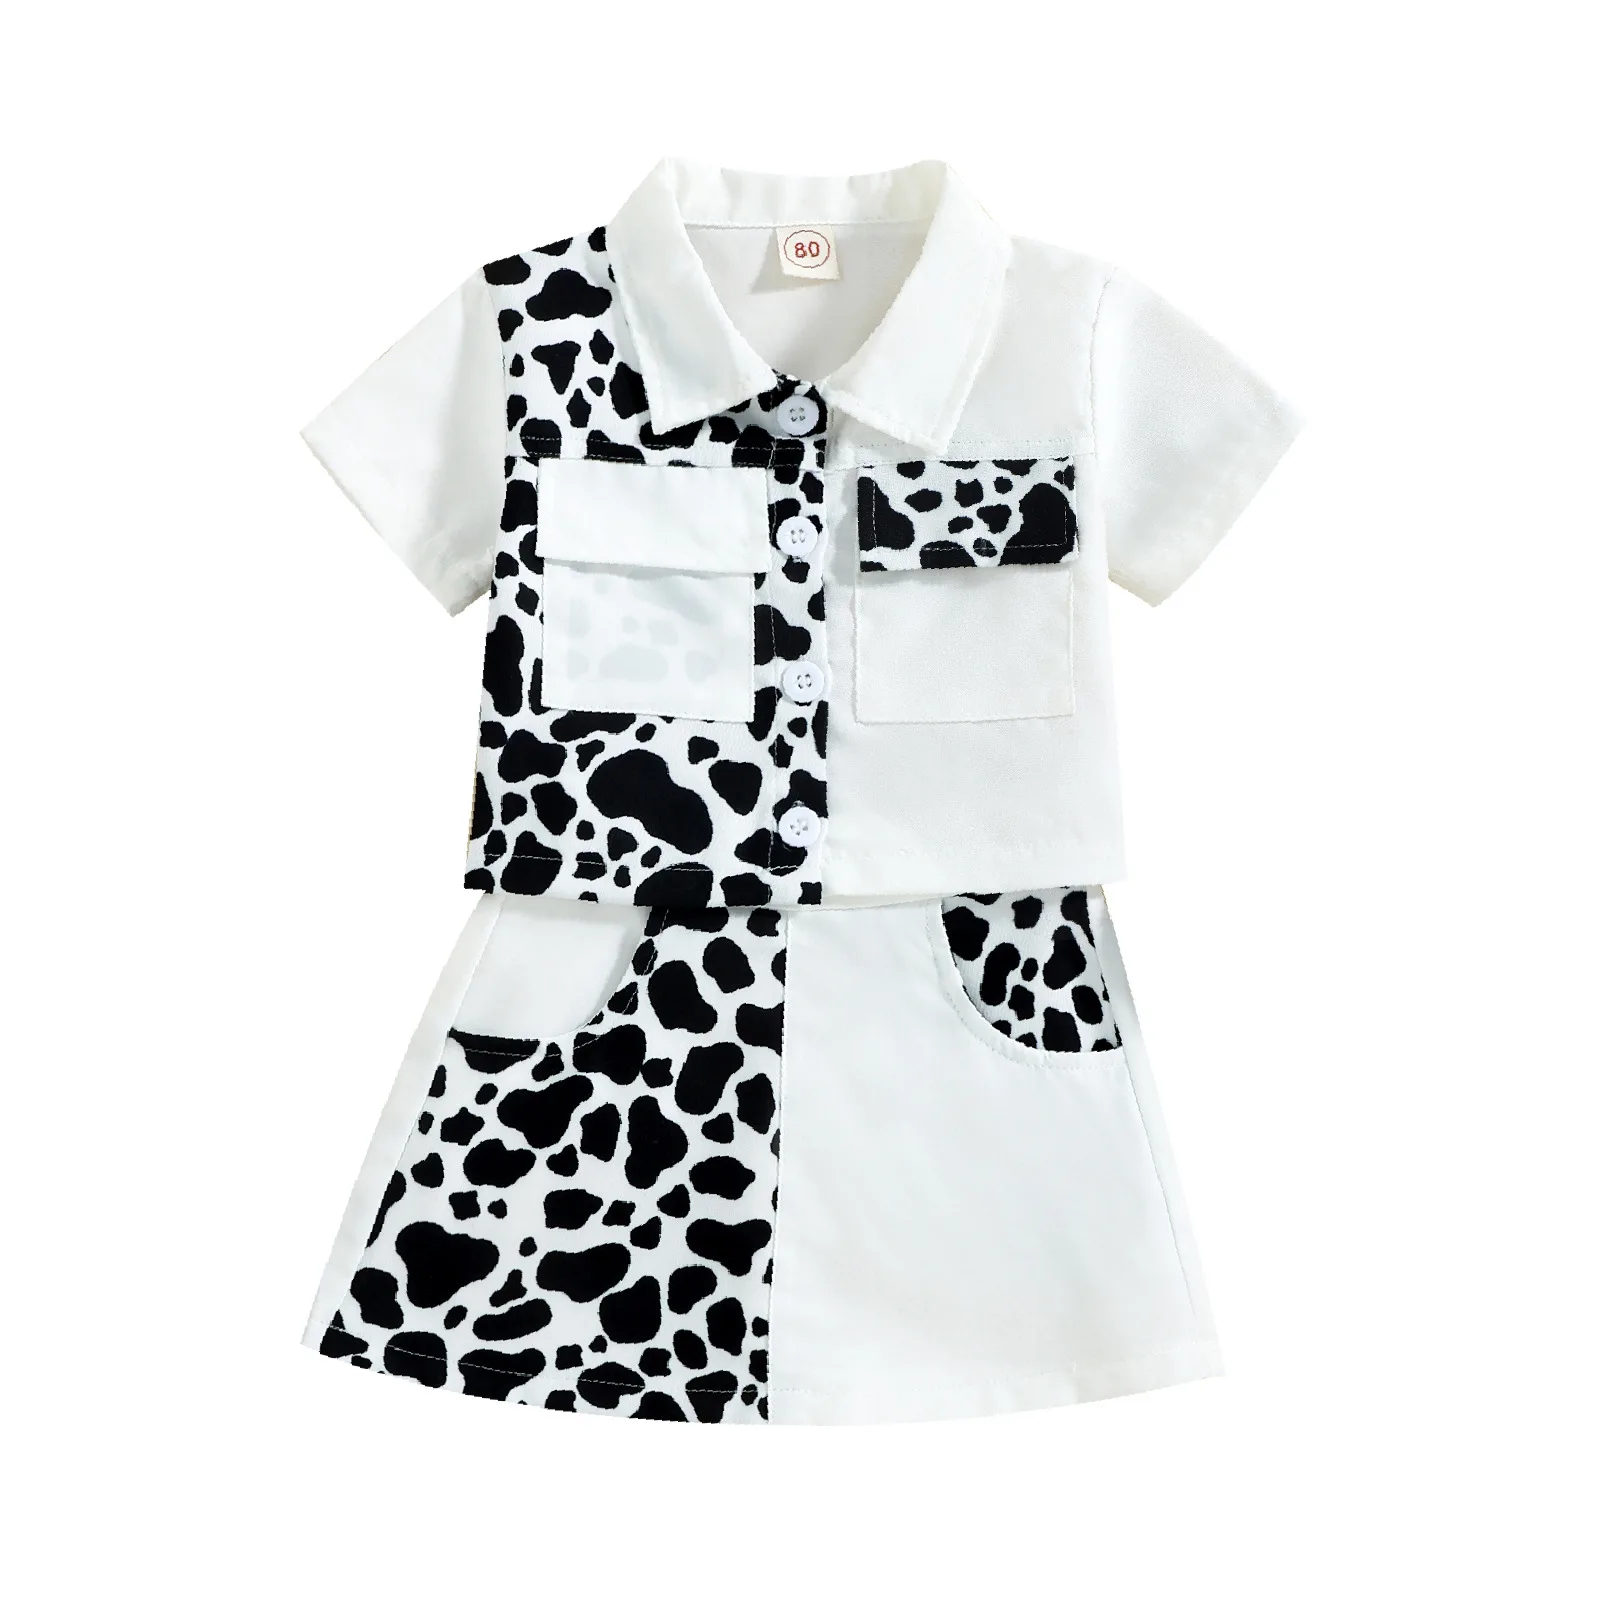 Summer fashion kids girls clothes sets crown leopard printed single breasted shirts tops+A-line skirts children suits